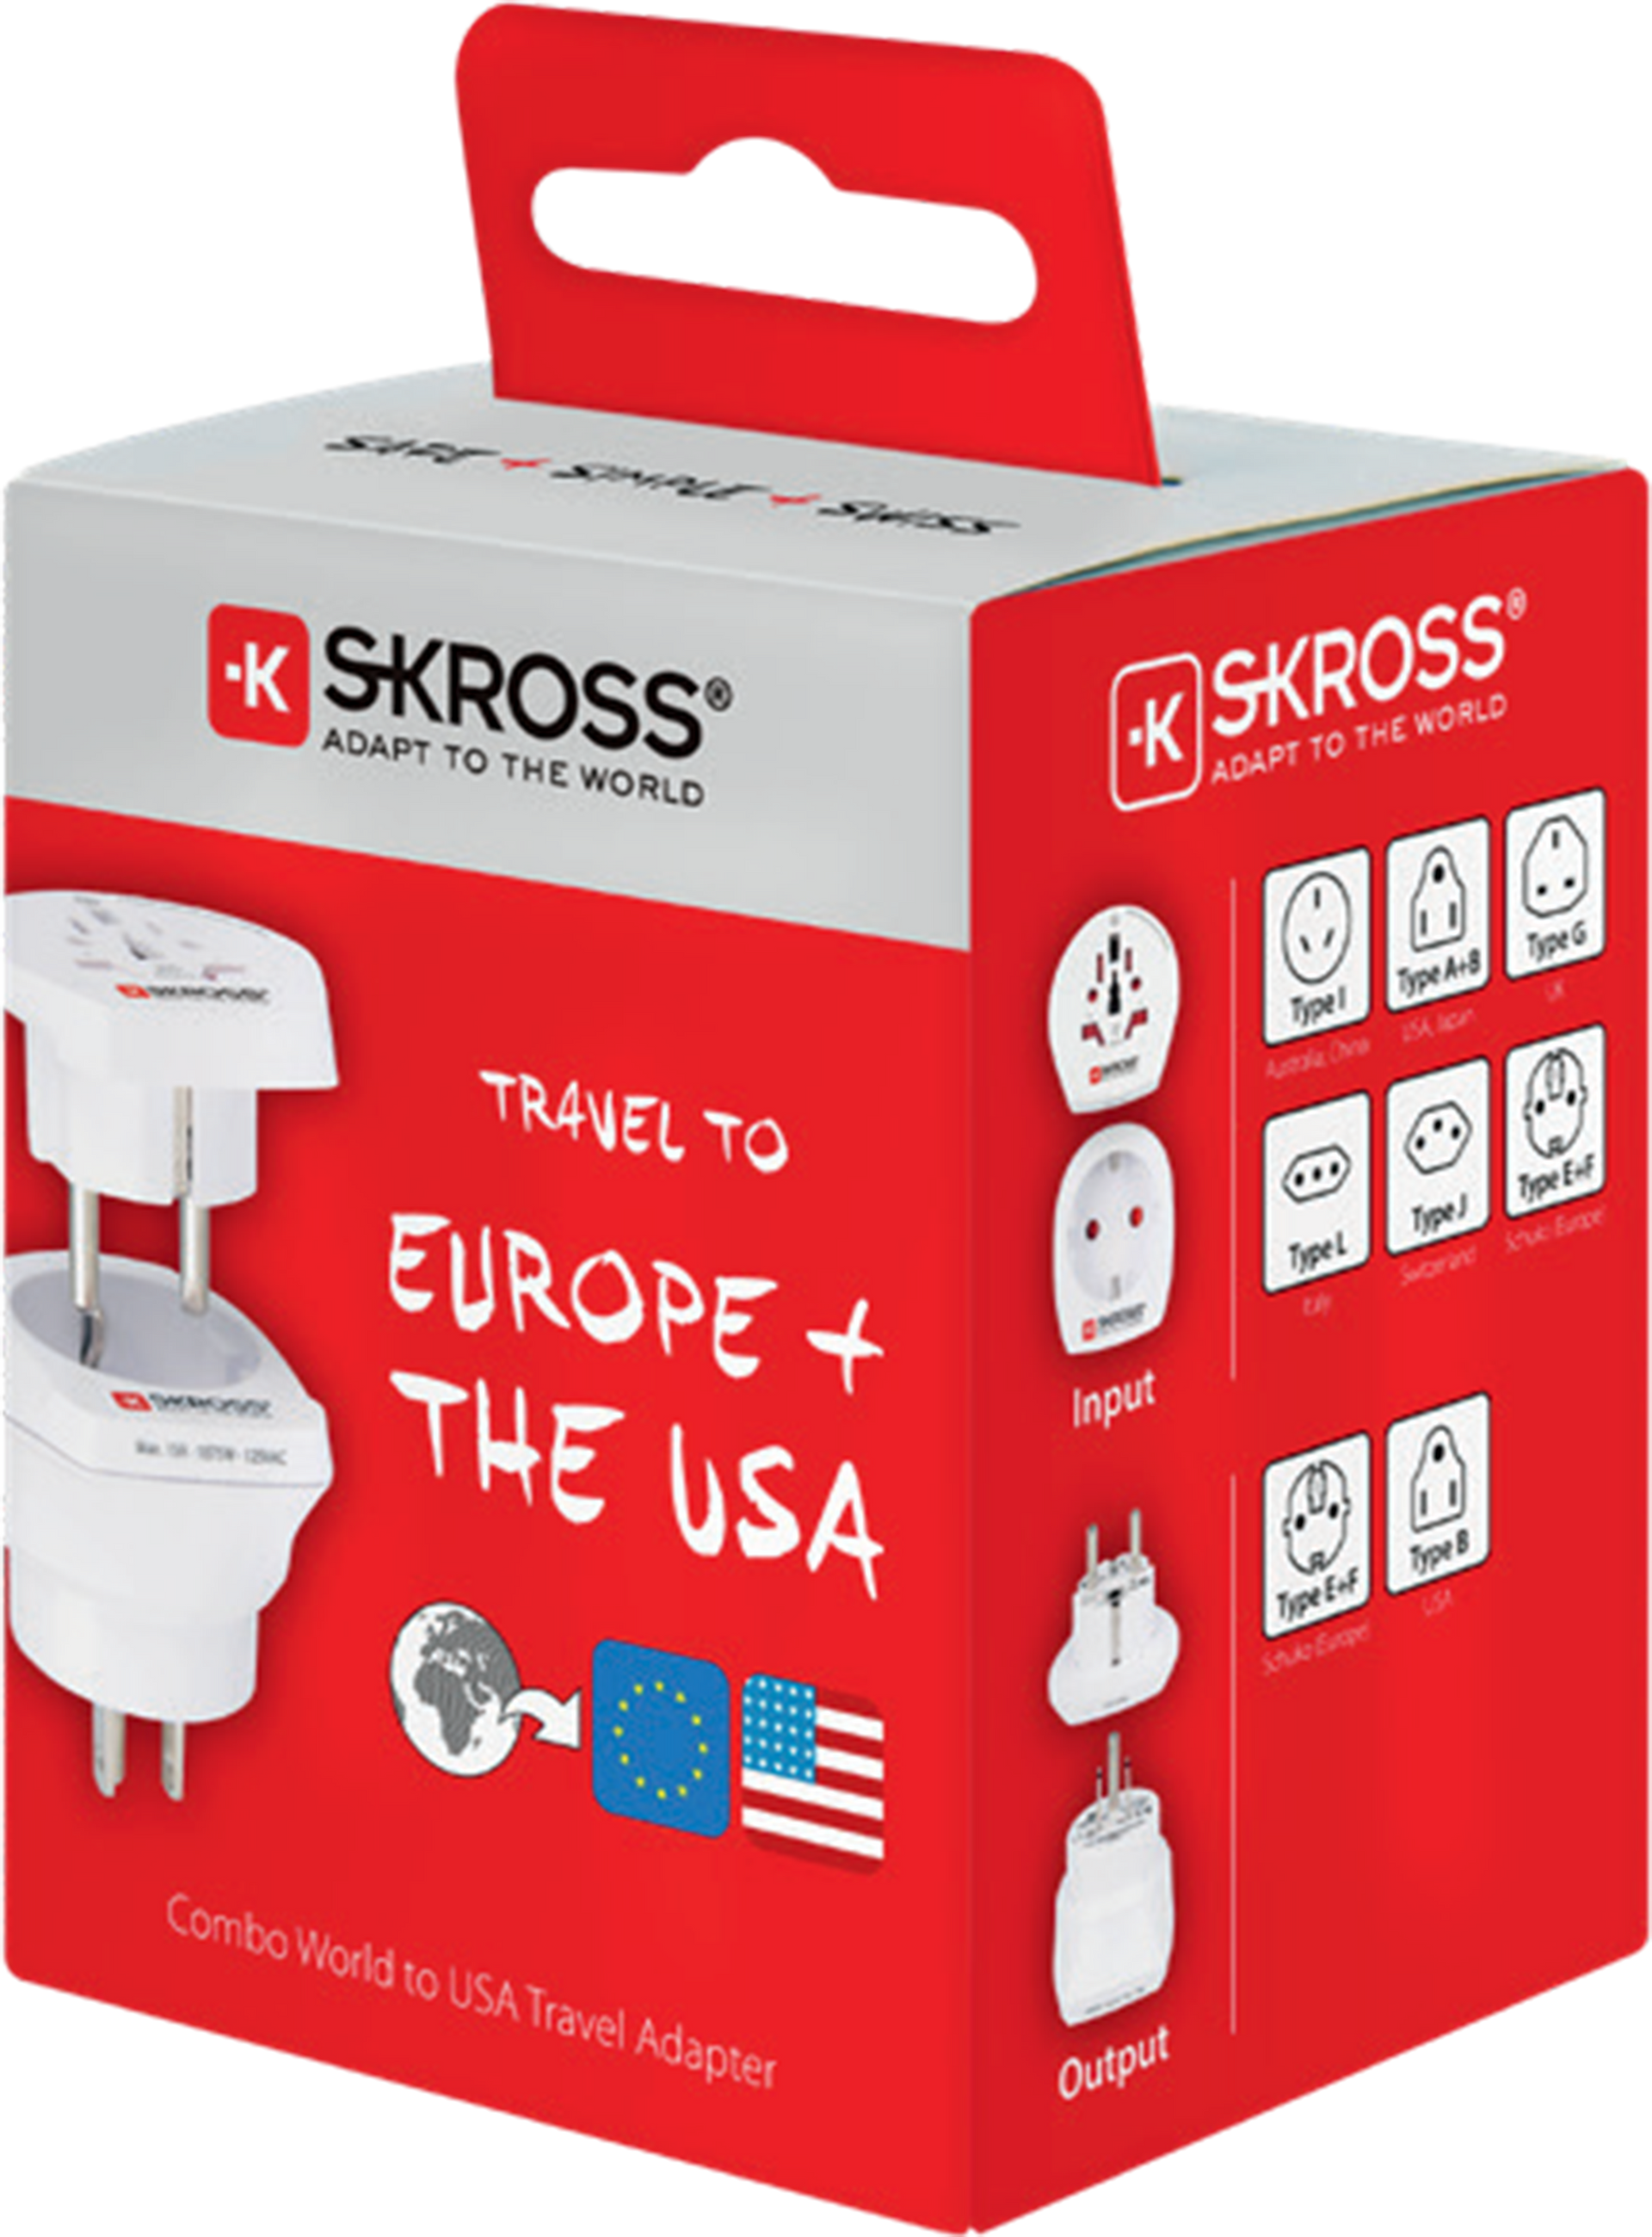 Skross 3-Pole Combo World to USA Travel Adapter Packaging